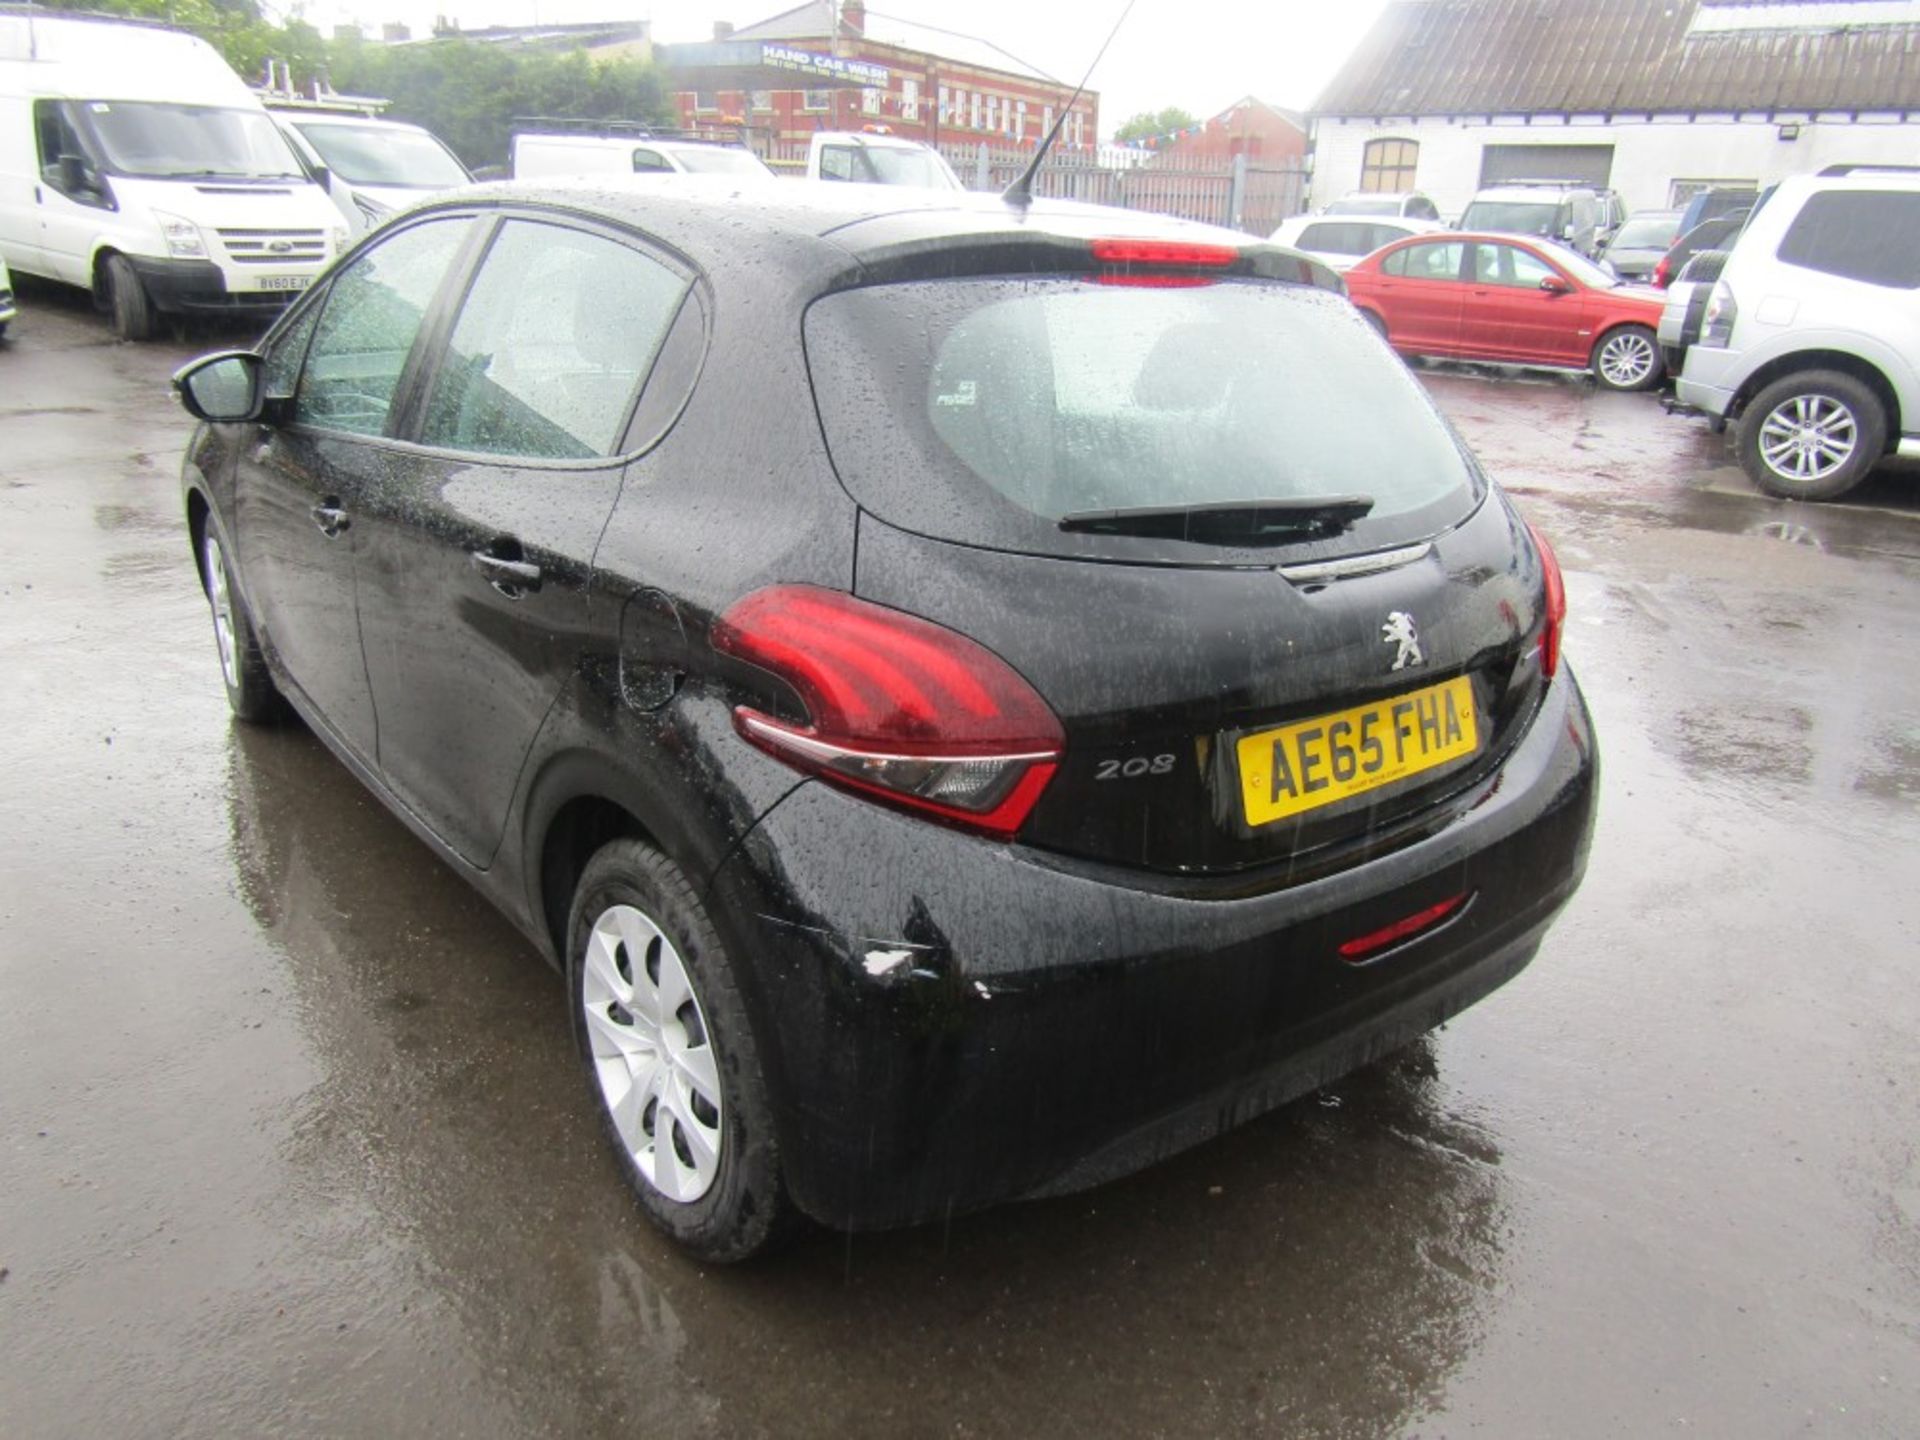 65 reg PEUGEOT 208 HDI, 1ST REG 02/16, 117984M WARRANTED, V5 HERE, 1 OWNER FROM NEW [NO VAT] - Image 3 of 6